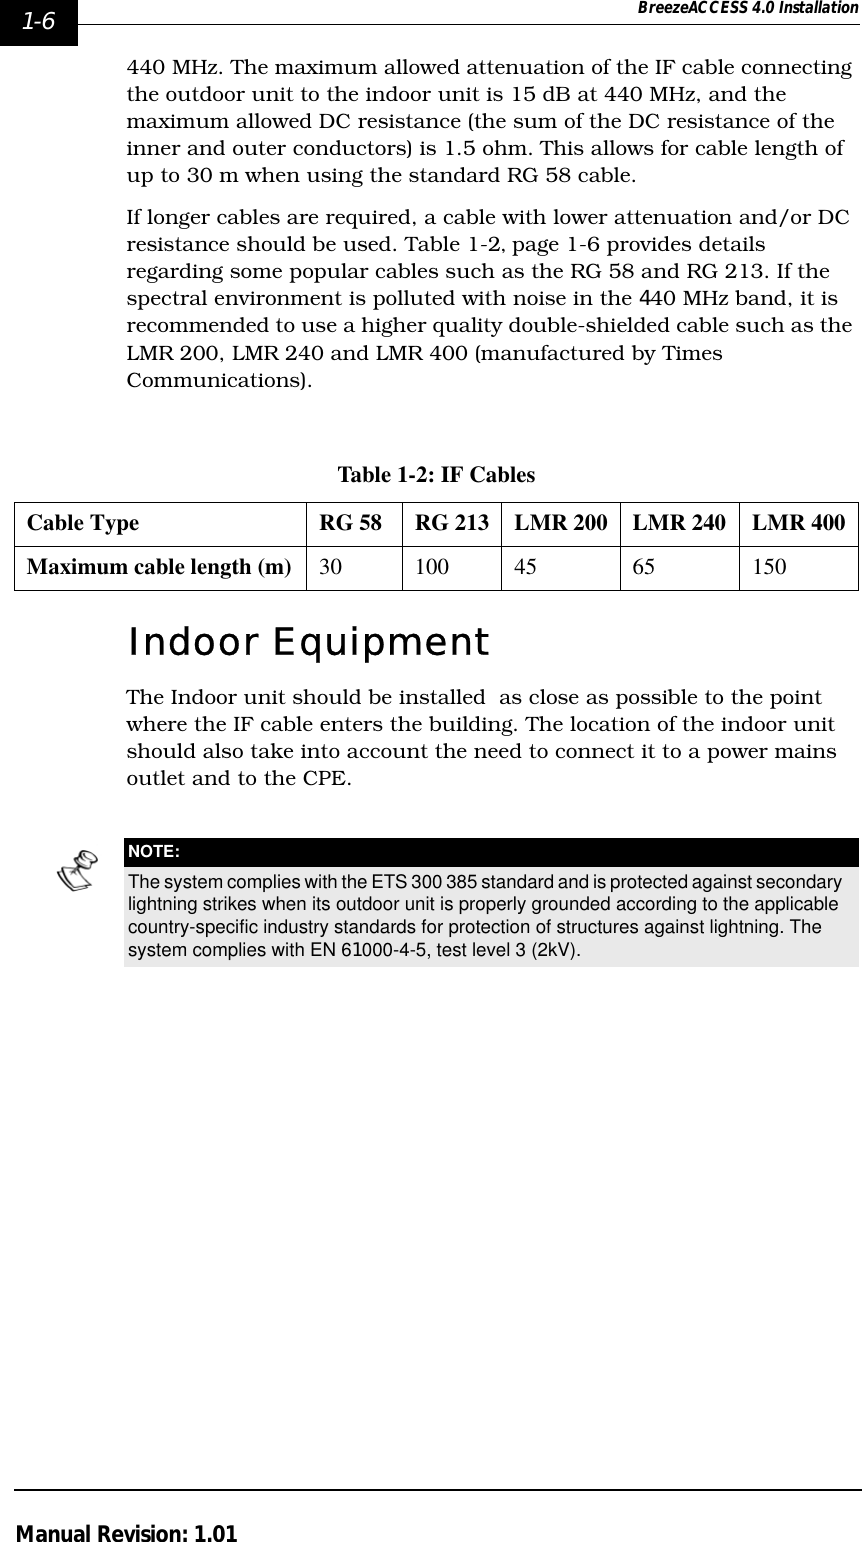 1-6 BreezeACCESS 4.0 InstallationManual Revision: 1.01440 MHz. The maximum allowed attenuation of the IF cable connecting the outdoor unit to the indoor unit is 15 dB at 440 MHz, and the maximum allowed DC resistance (the sum of the DC resistance of the inner and outer conductors) is 1.5 ohm. This allows for cable length of up to 30 m when using the standard RG 58 cable.If longer cables are required, a cable with lower attenuation and/or DC resistance should be used. Table 1-2‚ page 1-6 provides details regarding some popular cables such as the RG 58 and RG 213. If the spectral environment is polluted with noise in the 440 MHz band, it is recommended to use a higher quality double-shielded cable such as the LMR 200, LMR 240 and LMR 400 (manufactured by Times Communications).Indoor EquipmentThe Indoor unit should be installed  as close as possible to the point where the IF cable enters the building. The location of the indoor unit should also take into account the need to connect it to a power mains outlet and to the CPE.Table 1-2: IF CablesCable Type RG 58 RG 213 LMR 200 LMR 240 LMR 400Maximum cable length (m) 30 100 45 65 150NOTE:The system complies with the ETS 300 385 standard and is protected against secondary lightning strikes when its outdoor unit is properly grounded according to the applicable country-specific industry standards for protection of structures against lightning. The system complies with EN 61000-4-5, test level 3 (2kV).